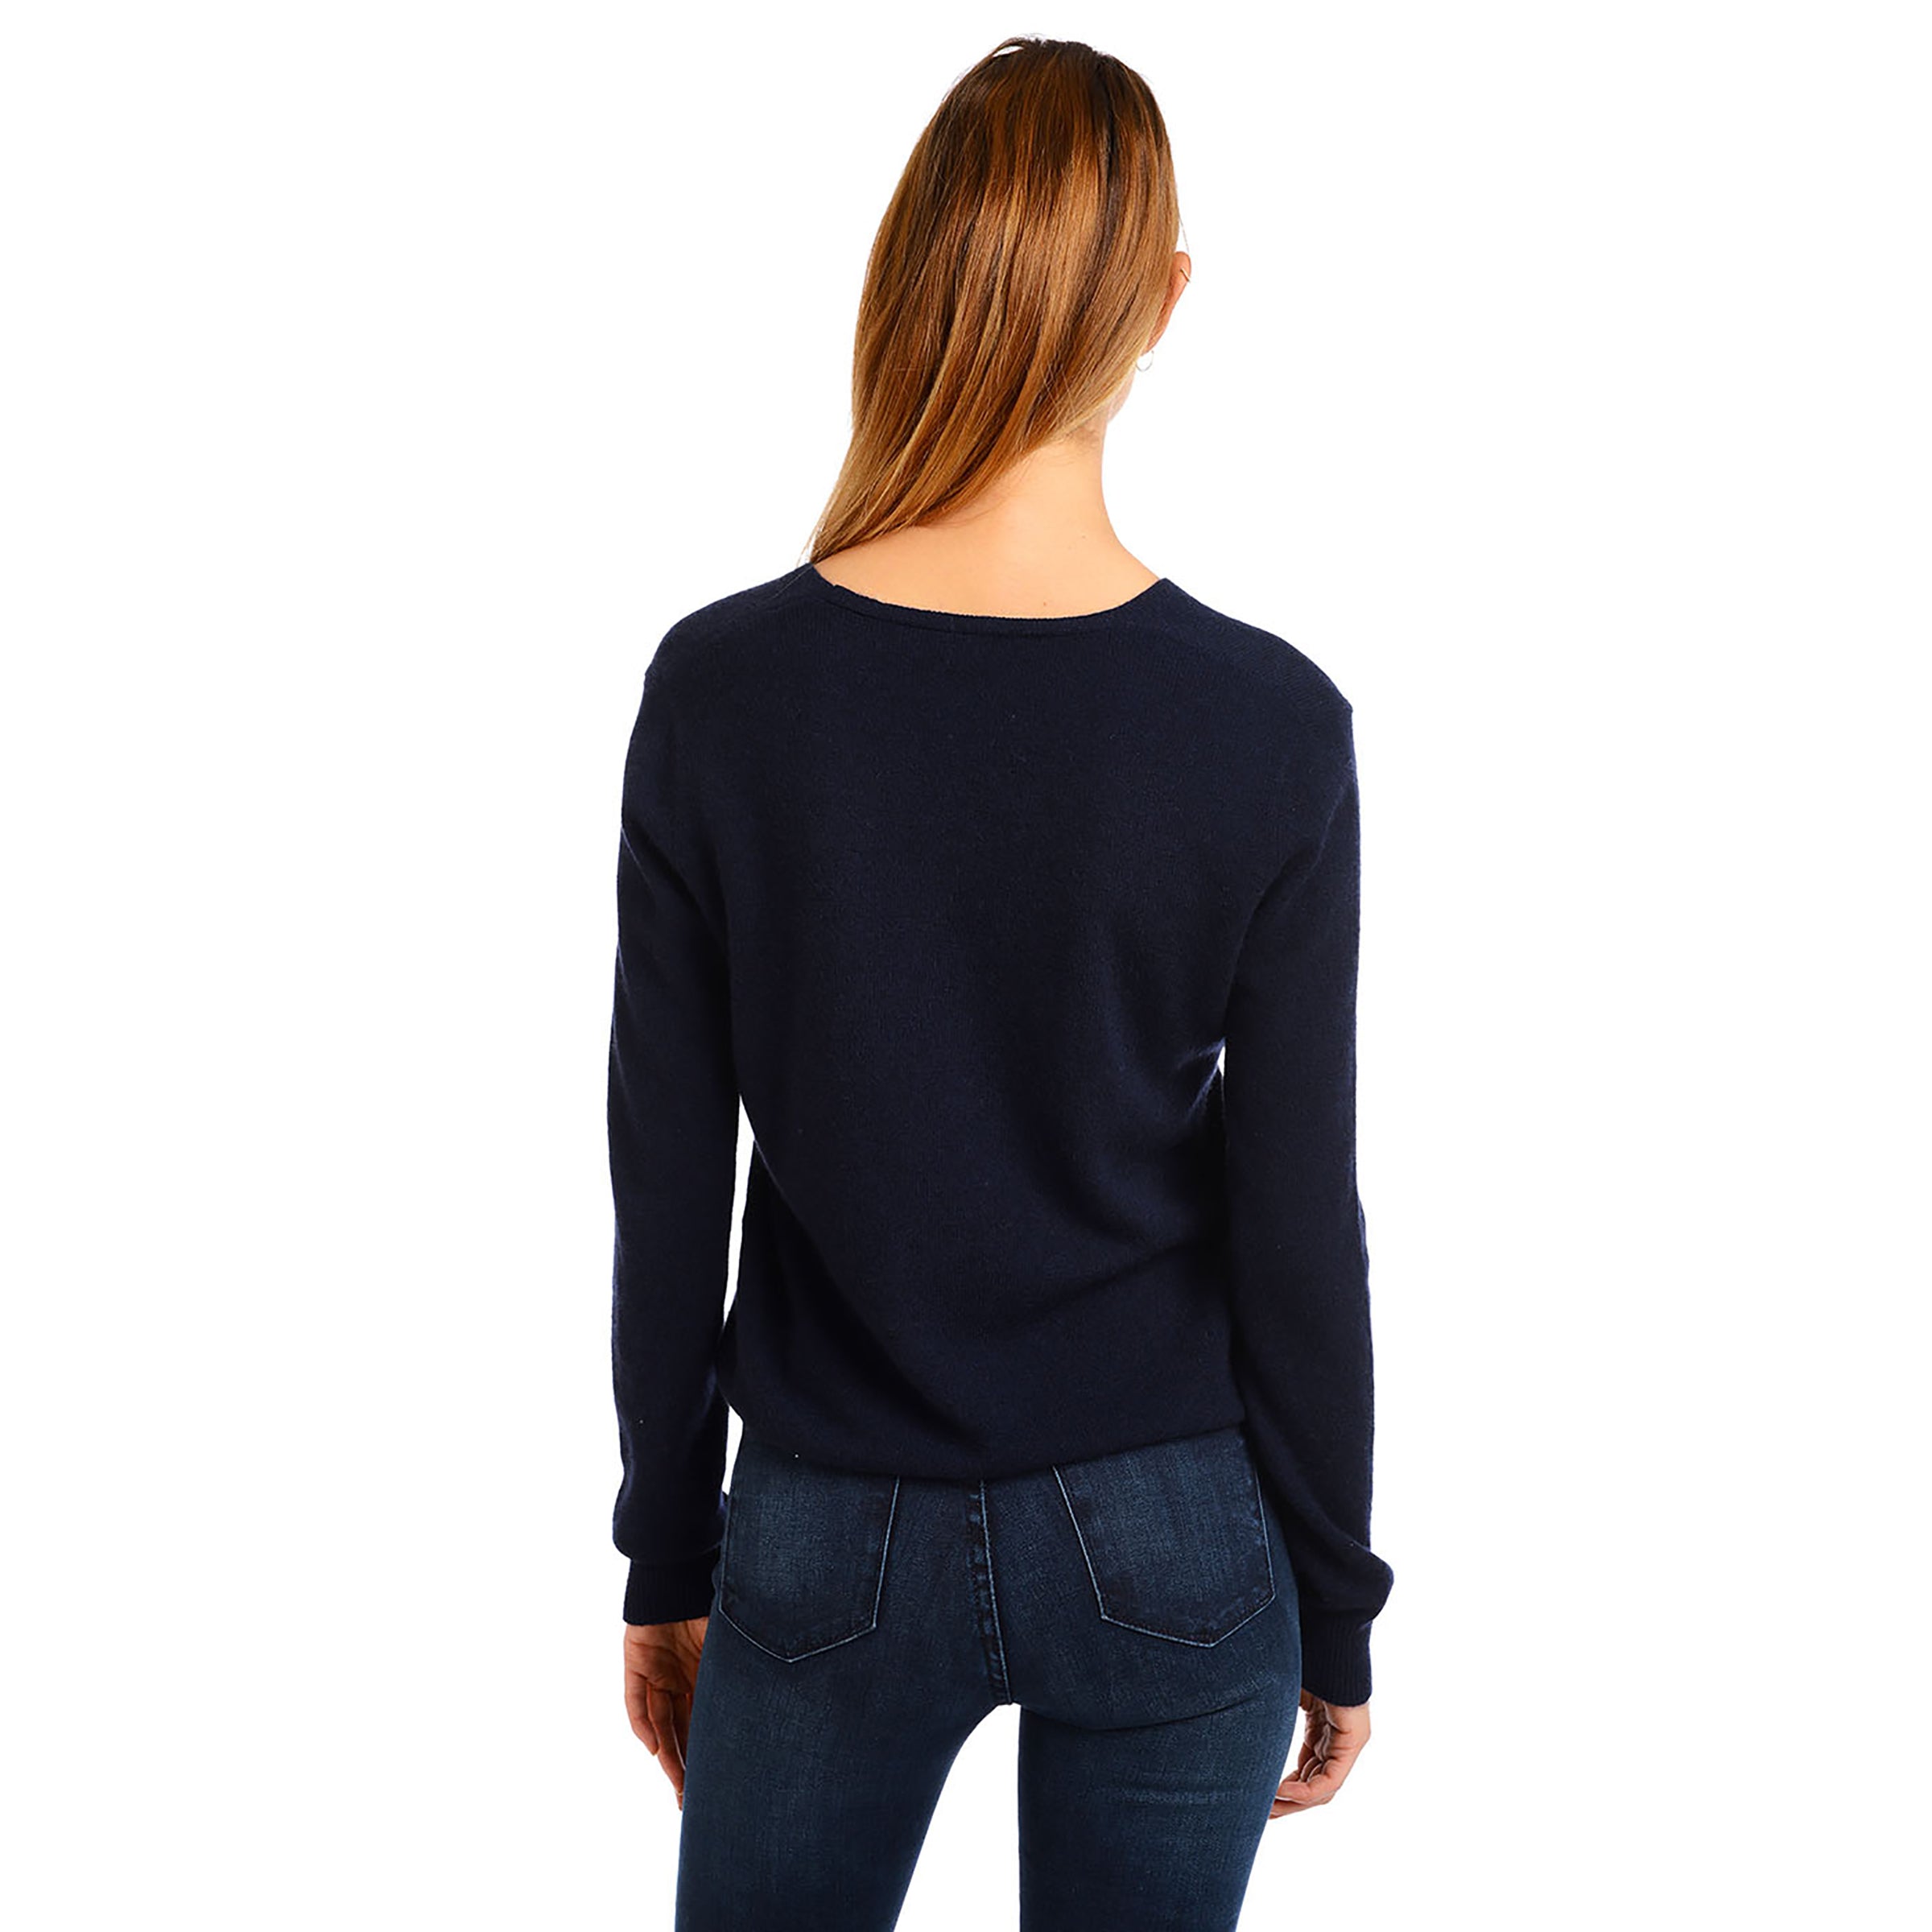 Women wearing Navy Cashmere Oversized V-Neck Willow Sweater